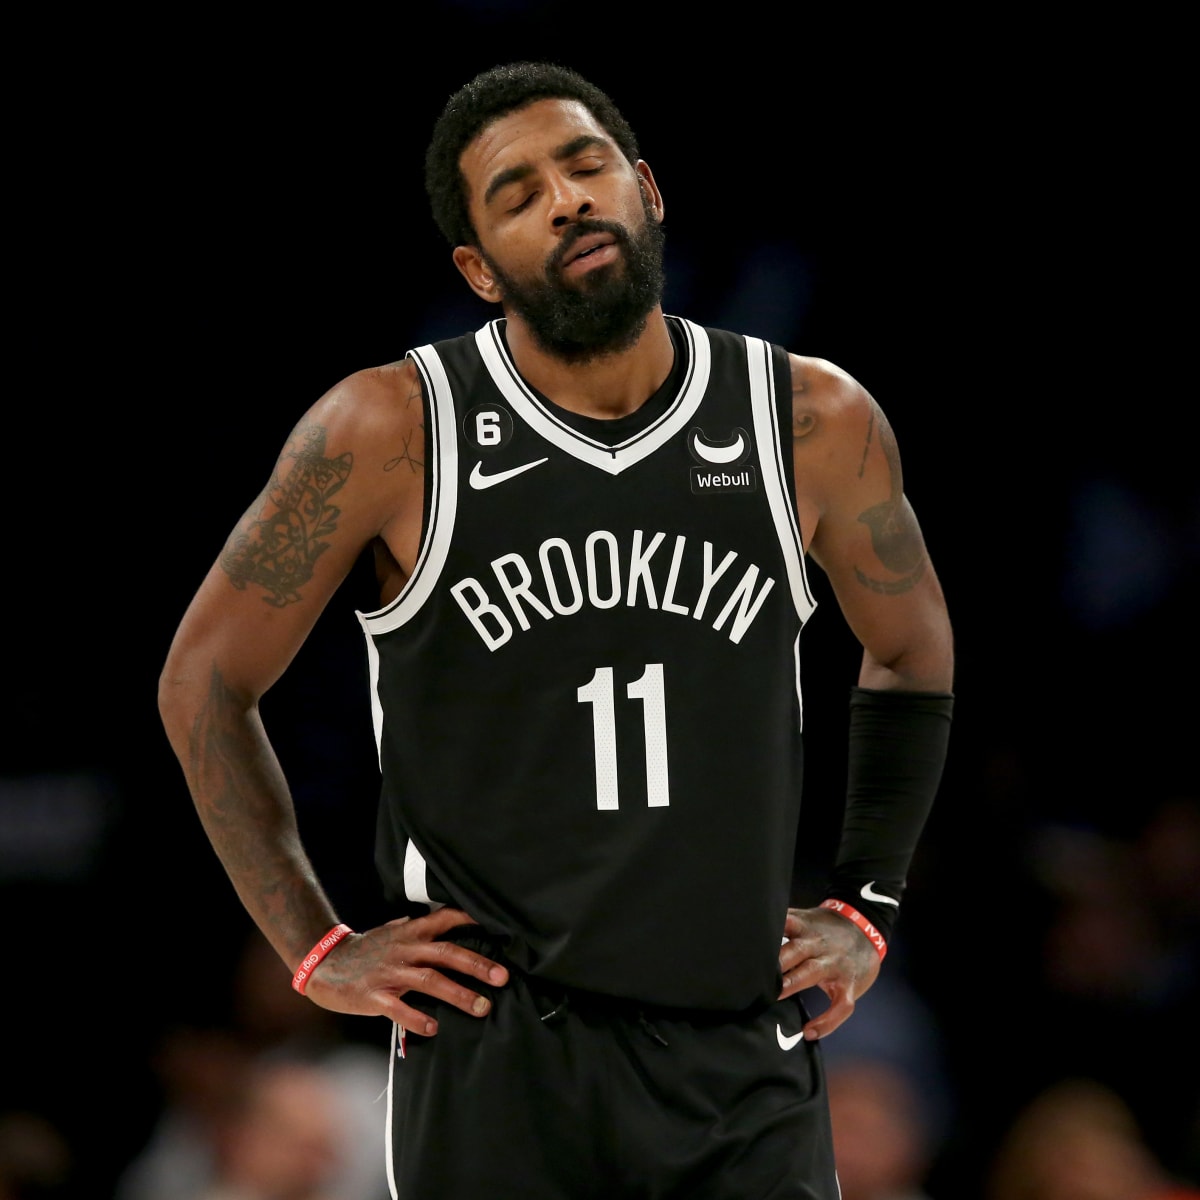 Nike cuts ties with Brooklyn Nets' Kyrie Irving